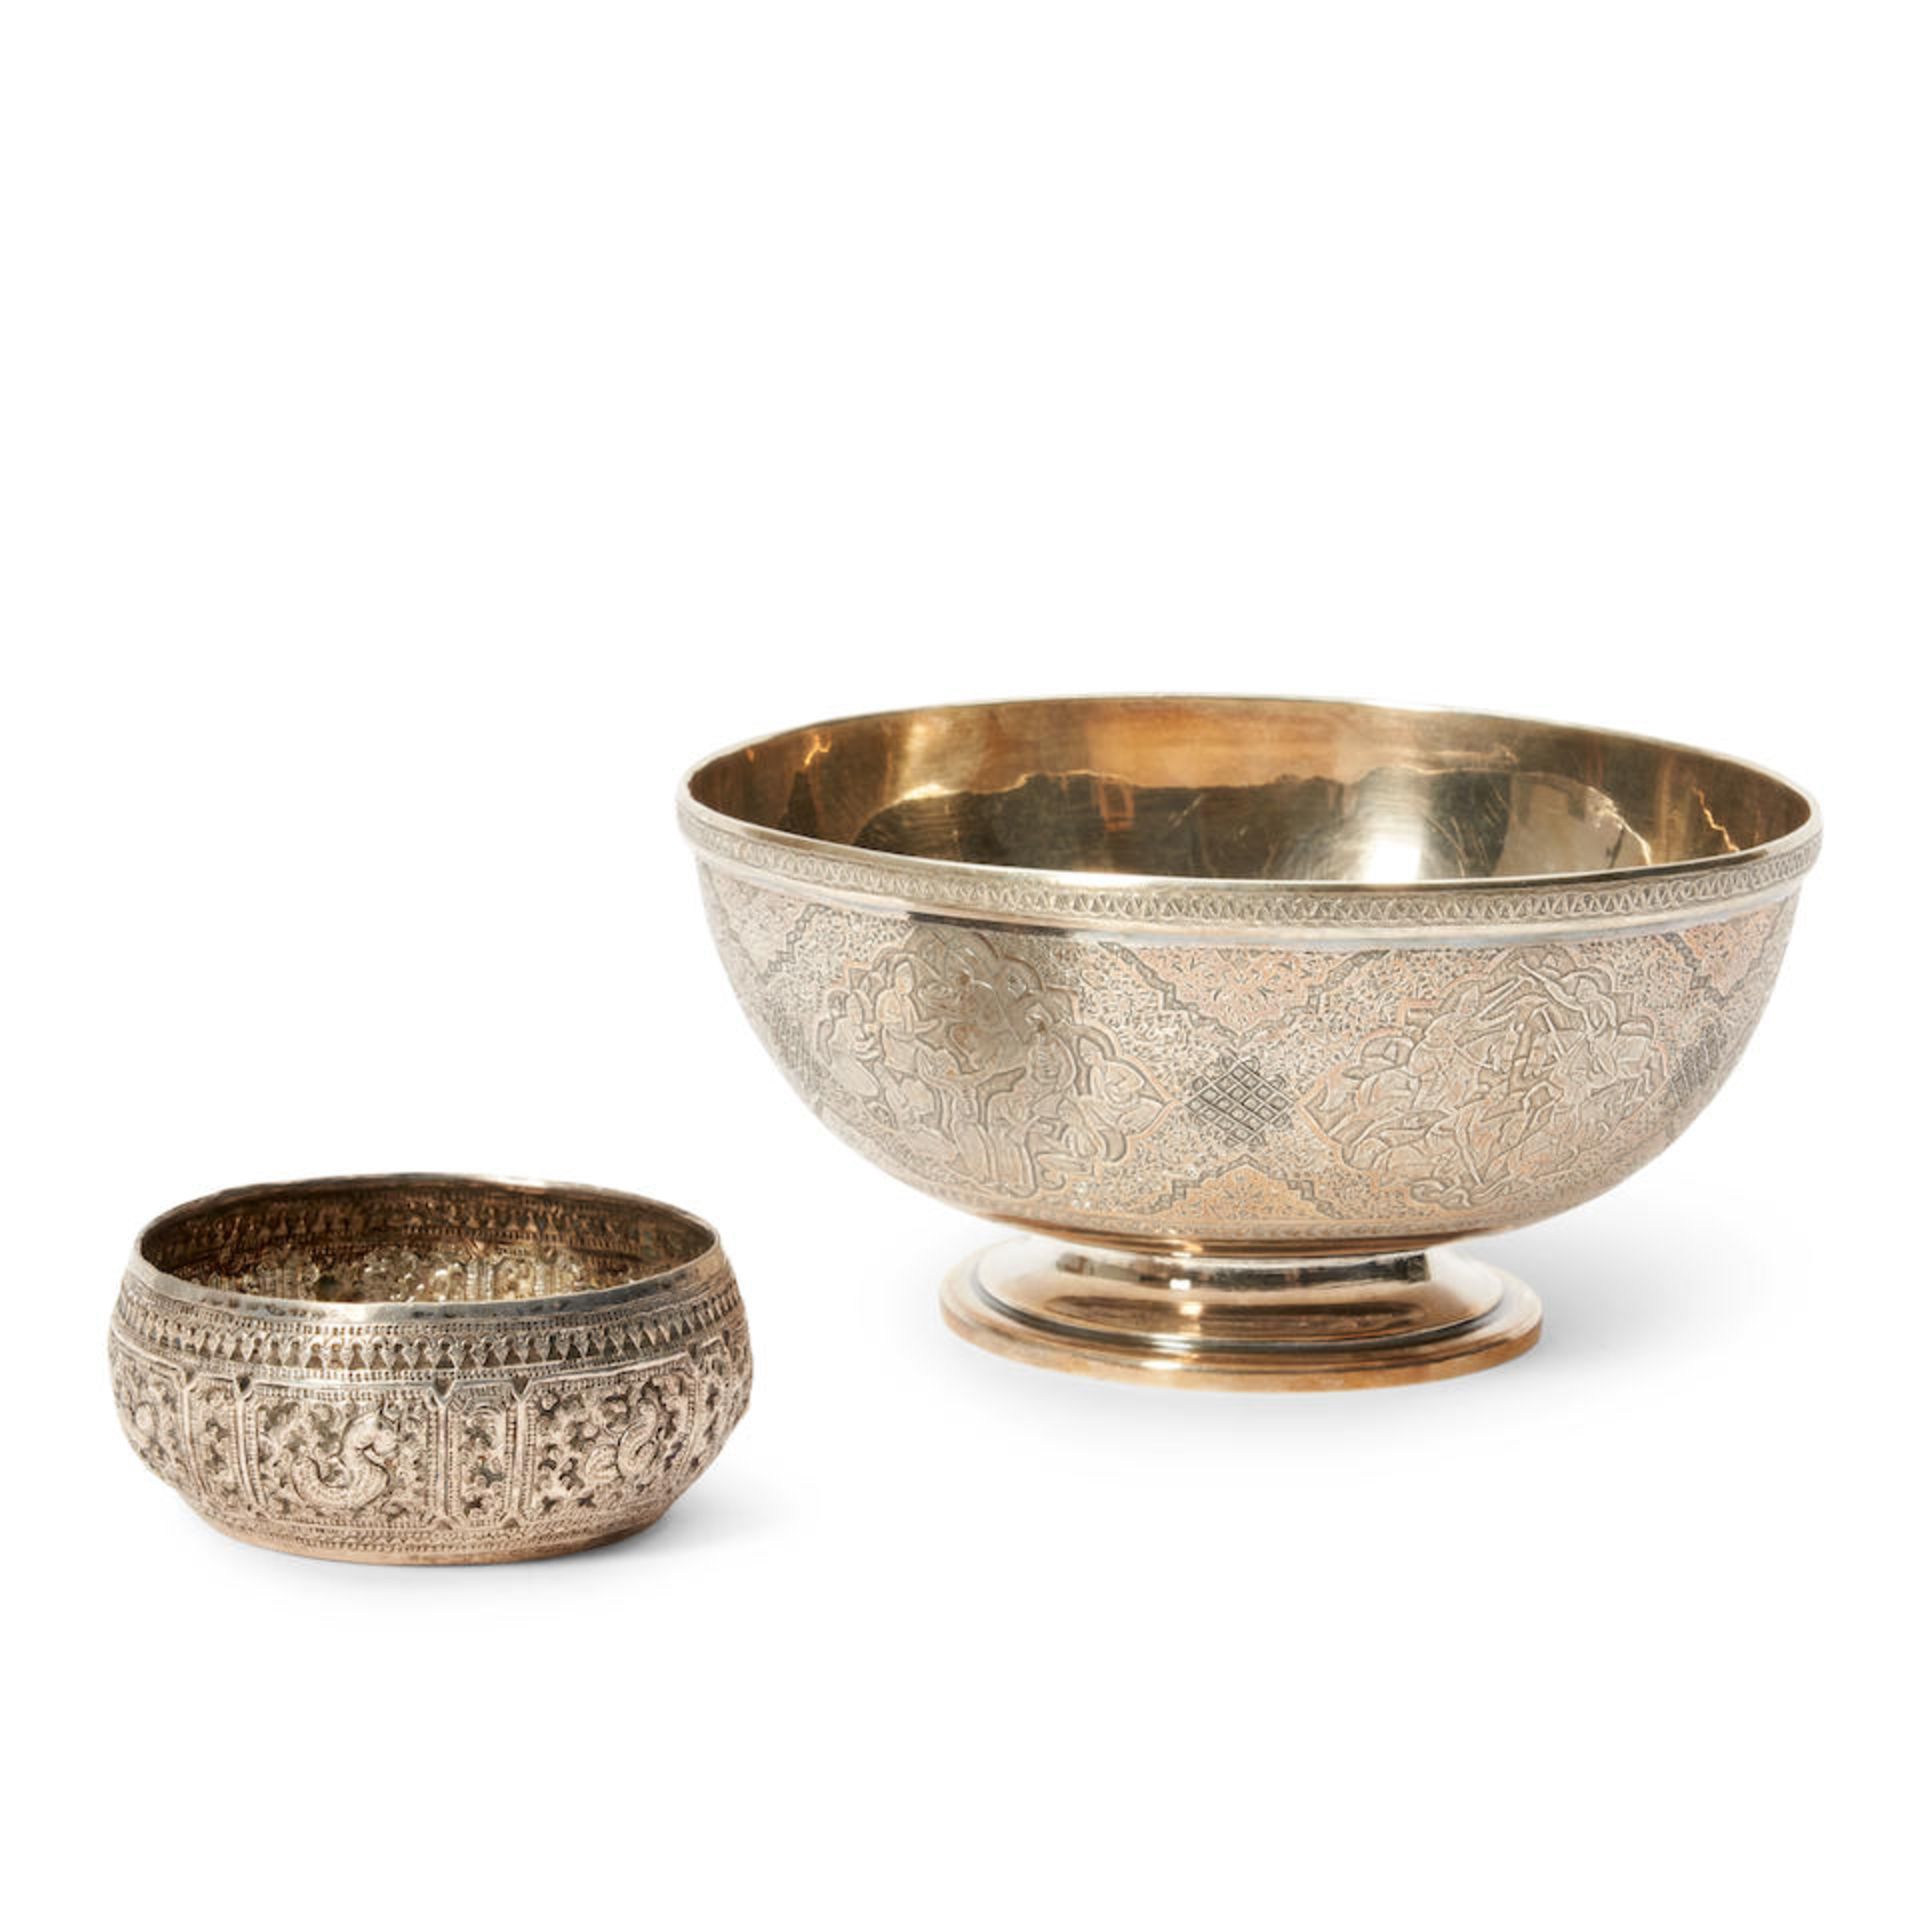 TWO PIECES OF THAI SILVER TABLEWARE